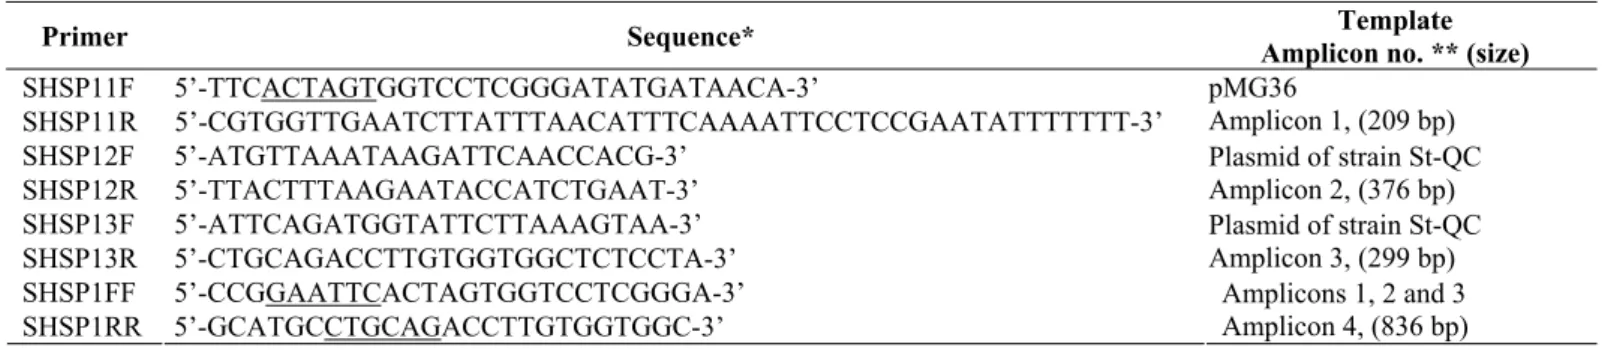 Table 1. Templates, sequence of primer pairs, and amplicon size of different PCR products  